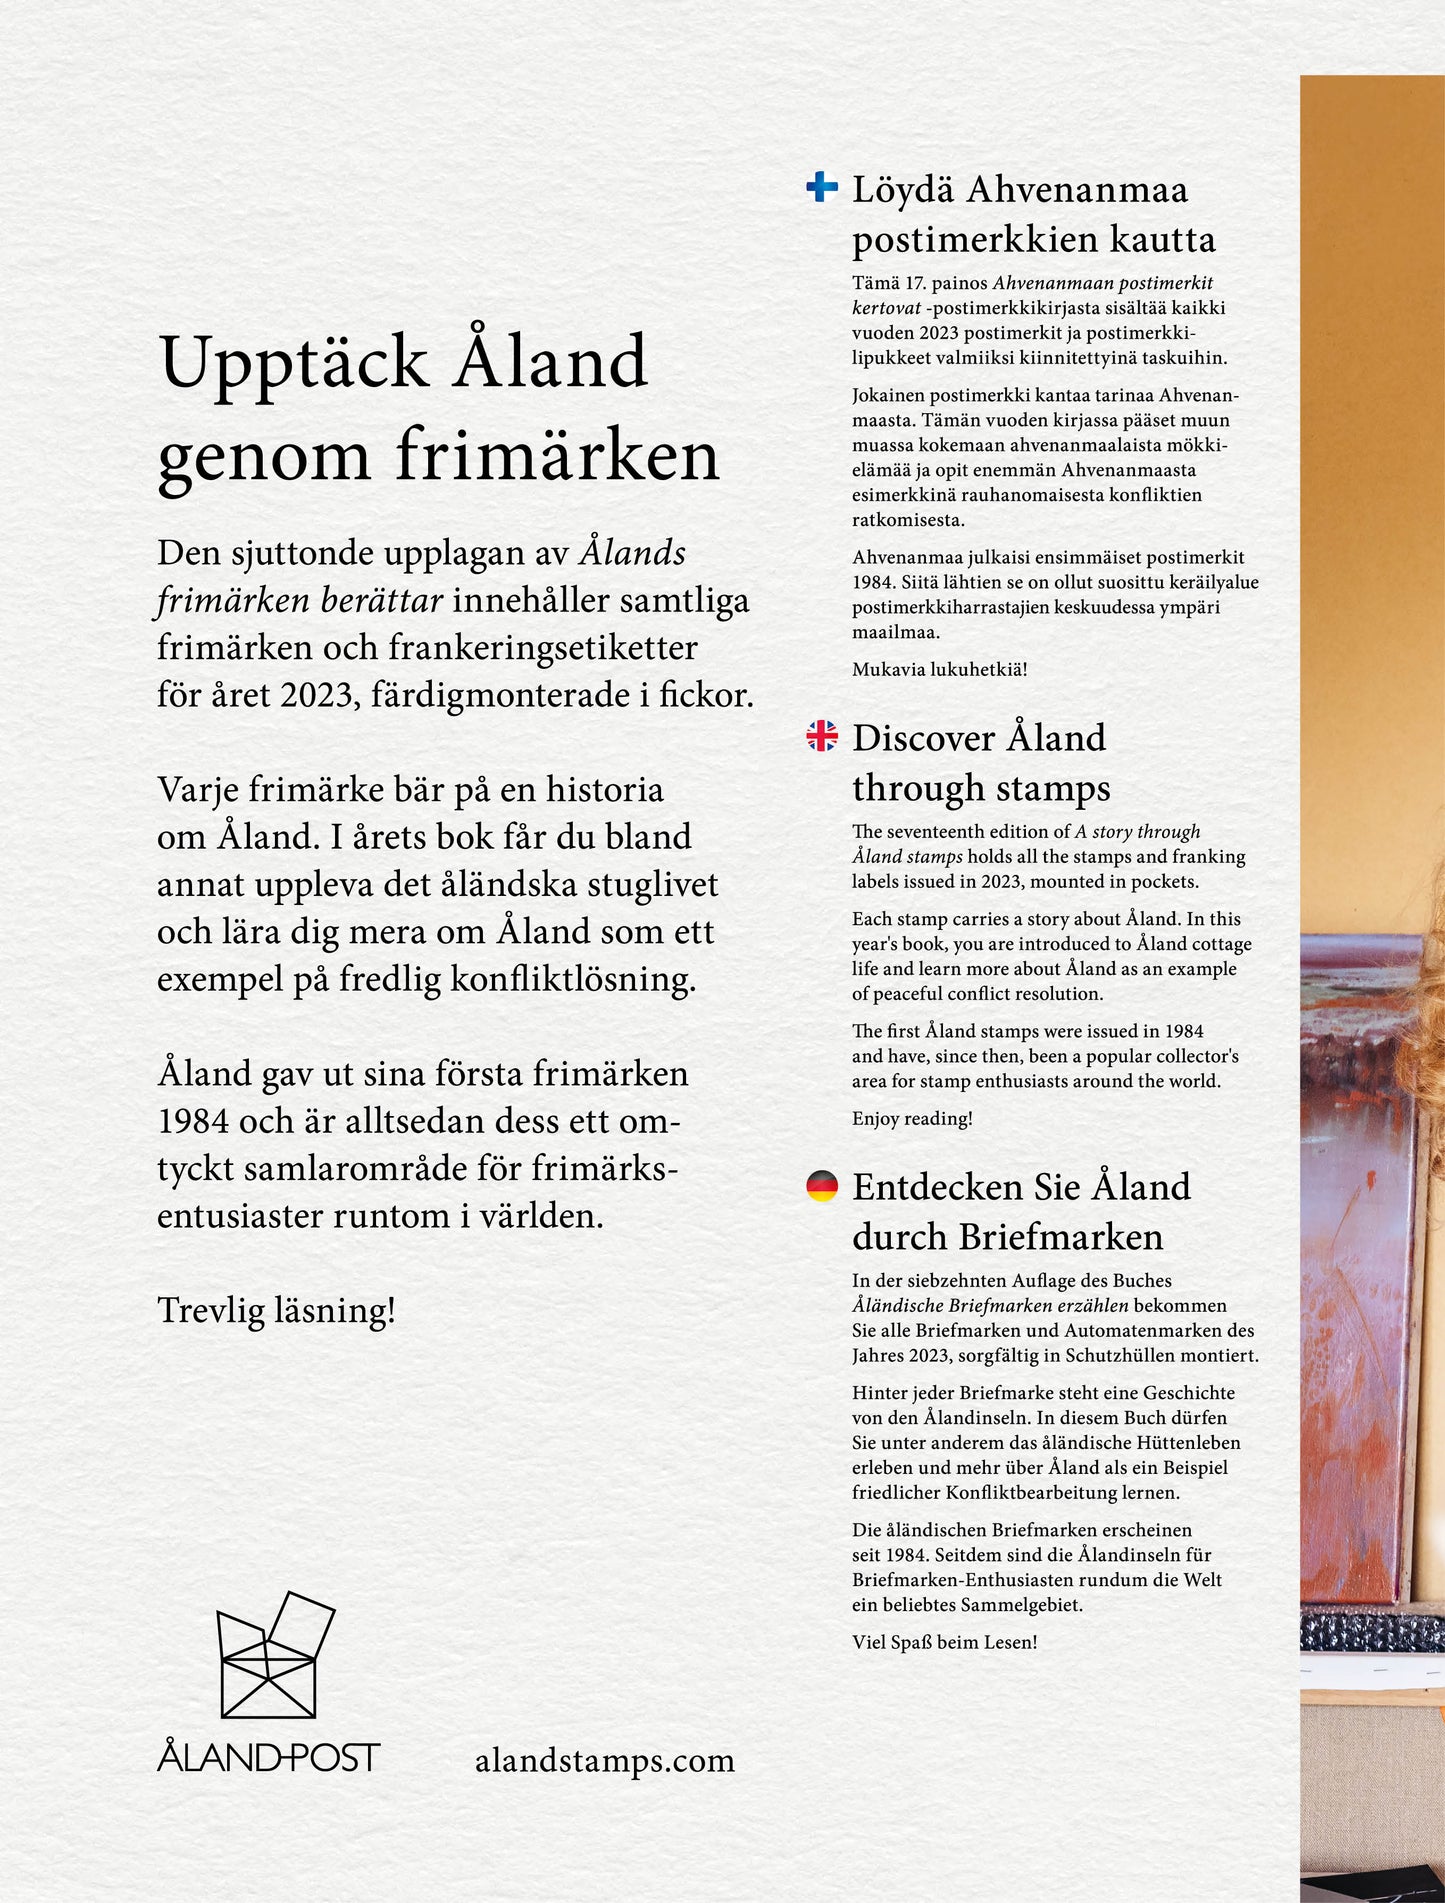 Yearbook, “A story through Åland stamps 2023” 